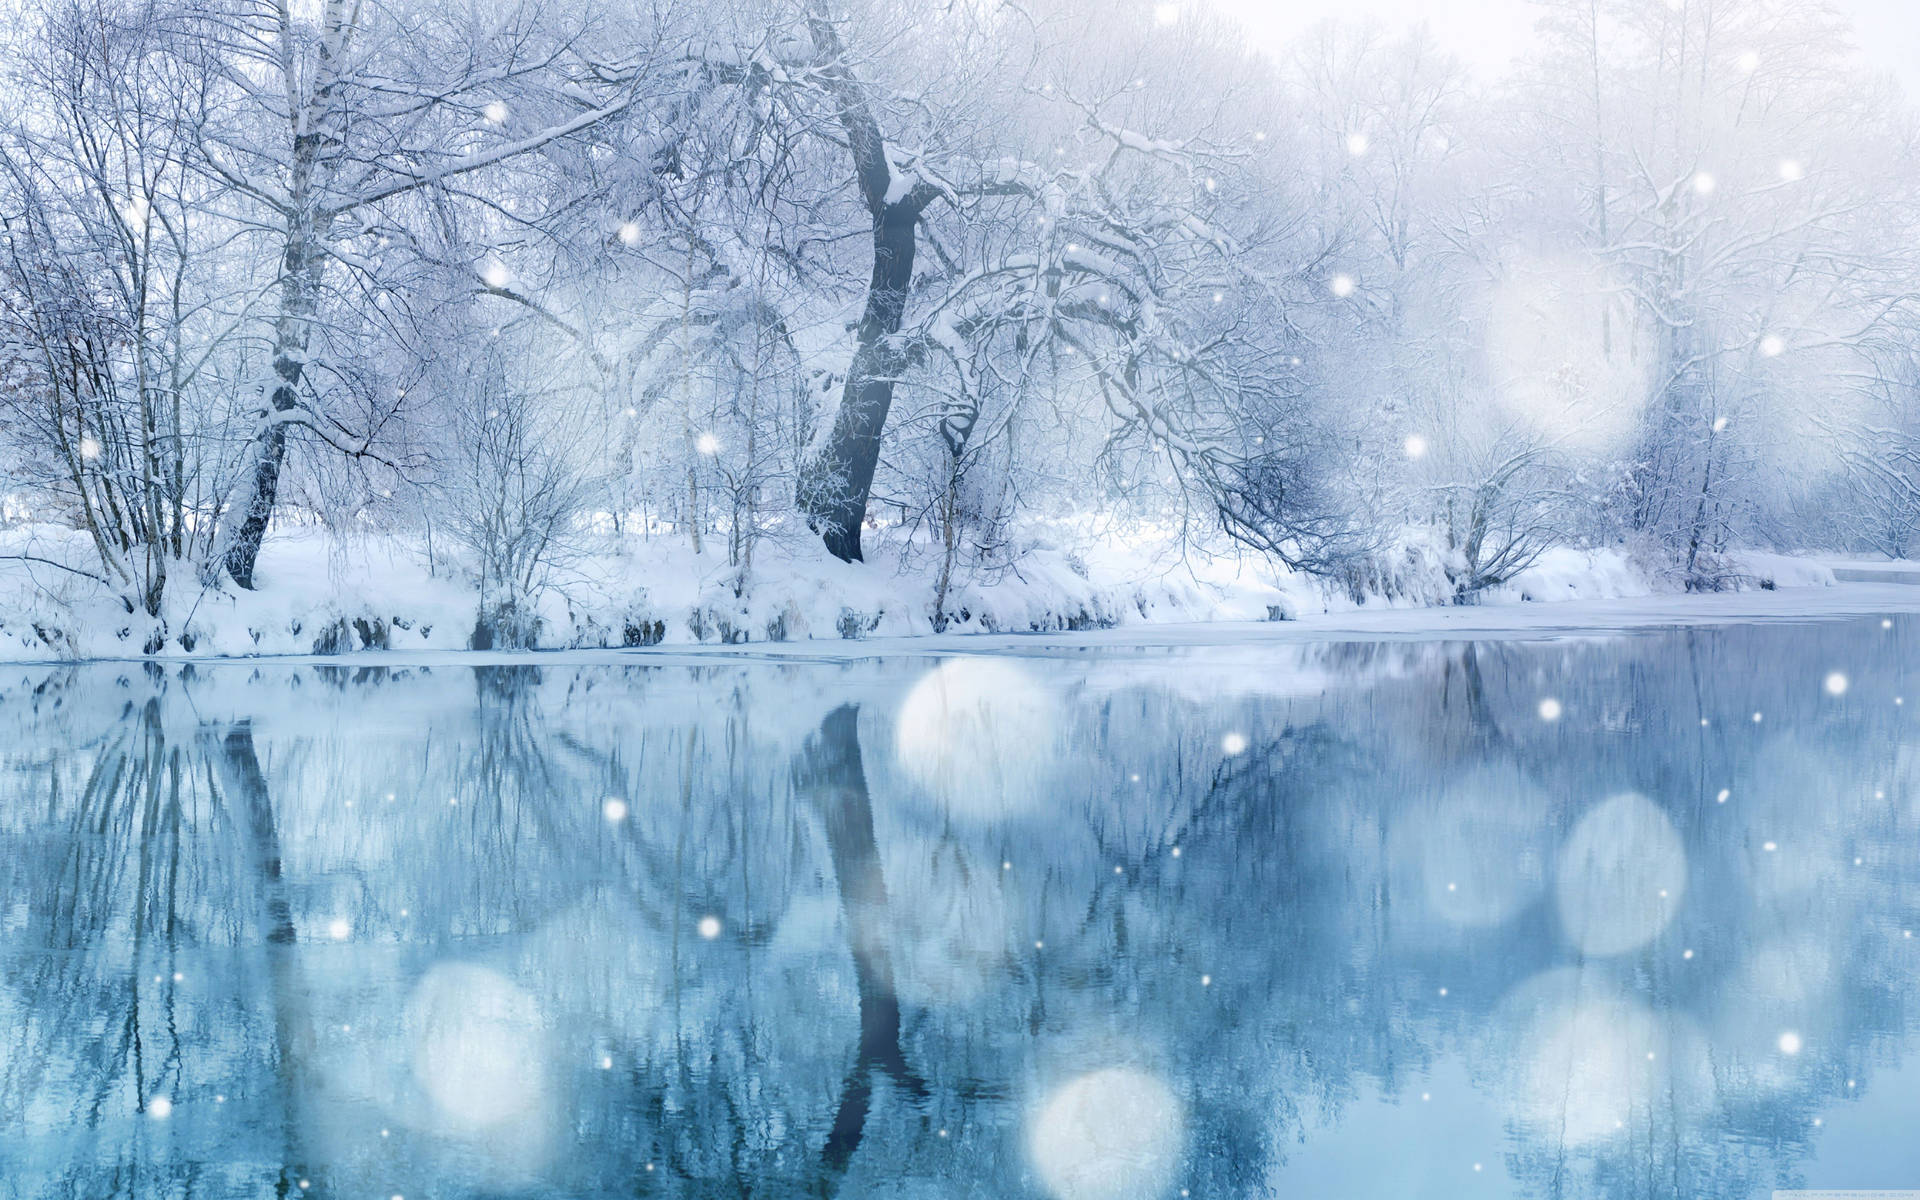 Enjoying the winter snowfall in its purest form. Wallpaper